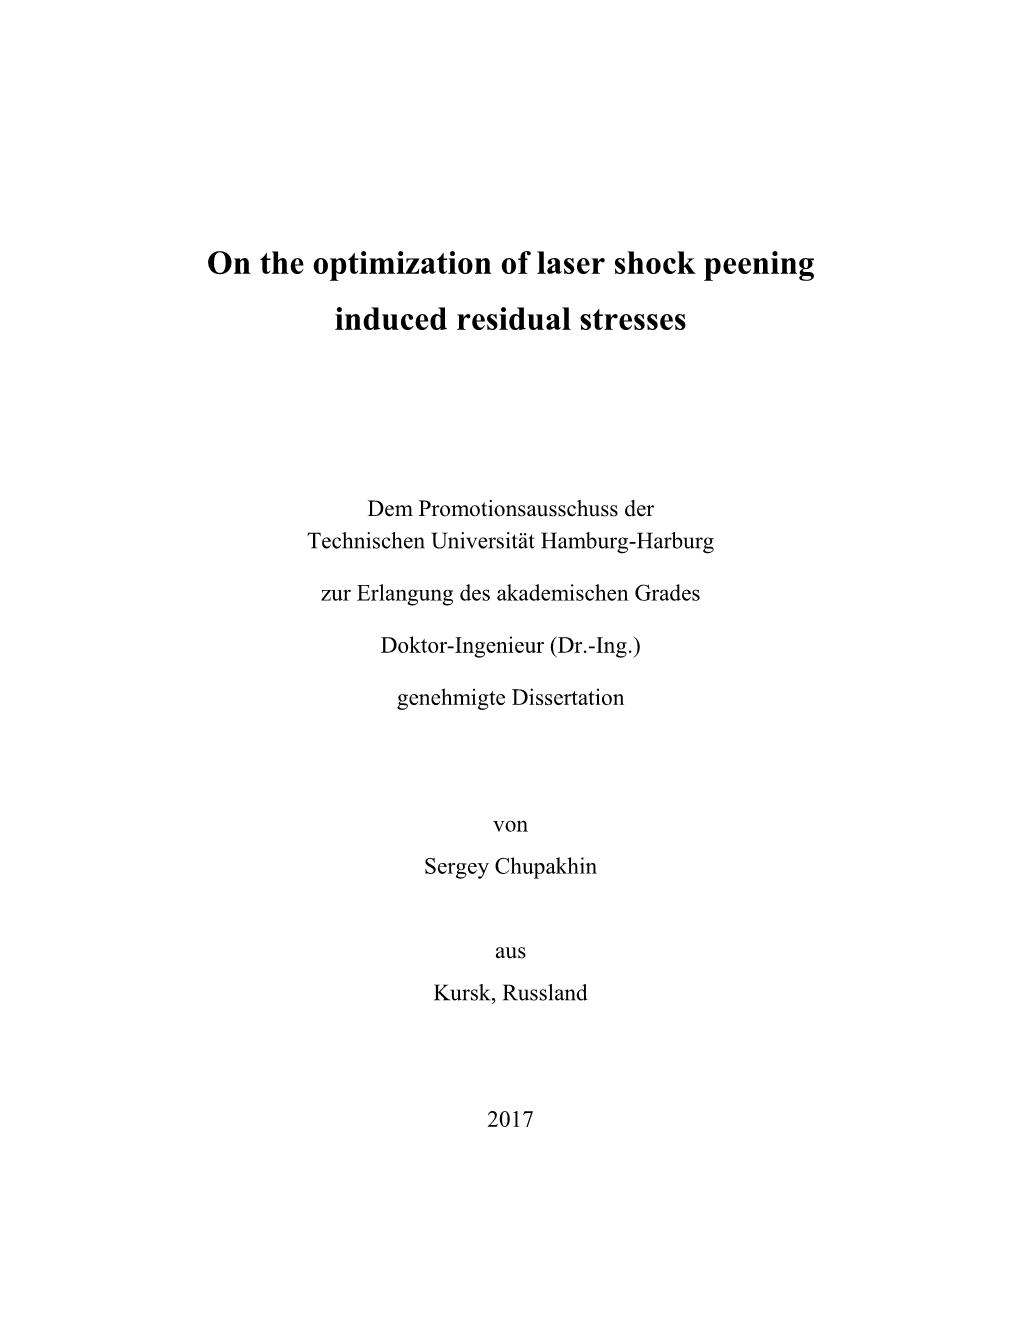 On the Optimization of Laser Shock Peening Induced Residual Stresses